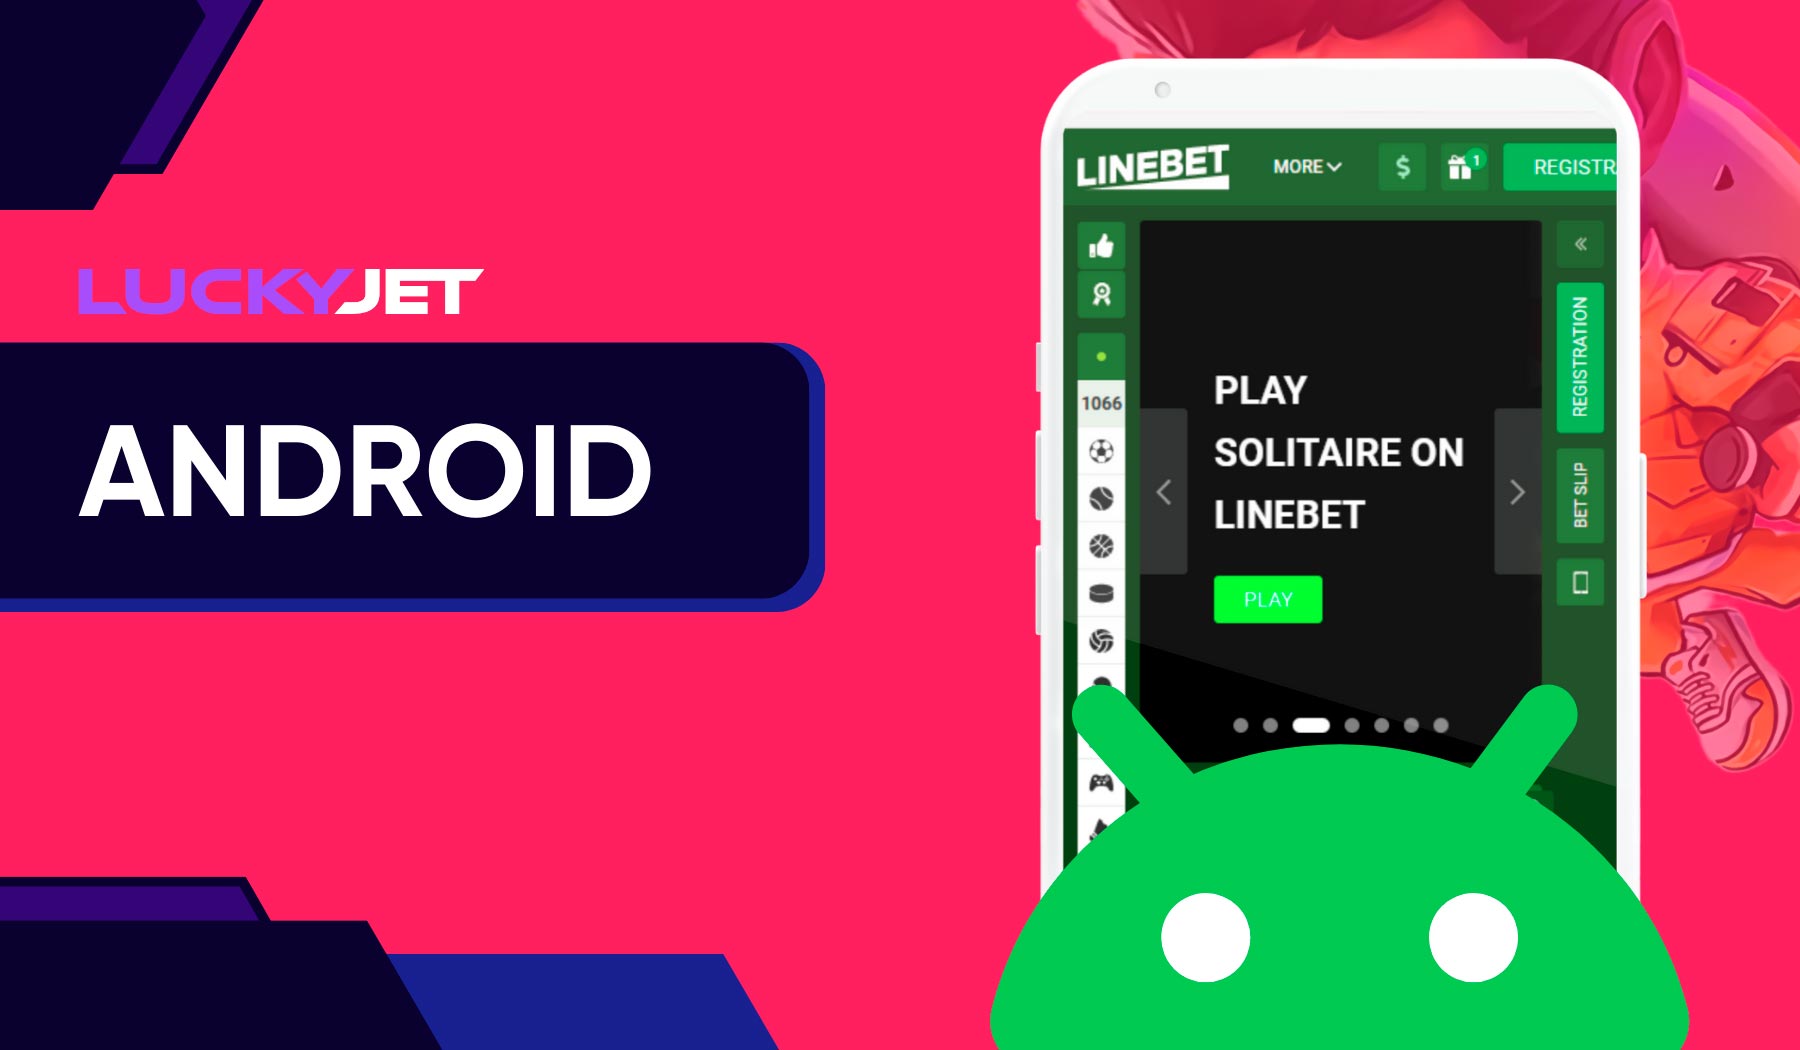 The Linebet Android app